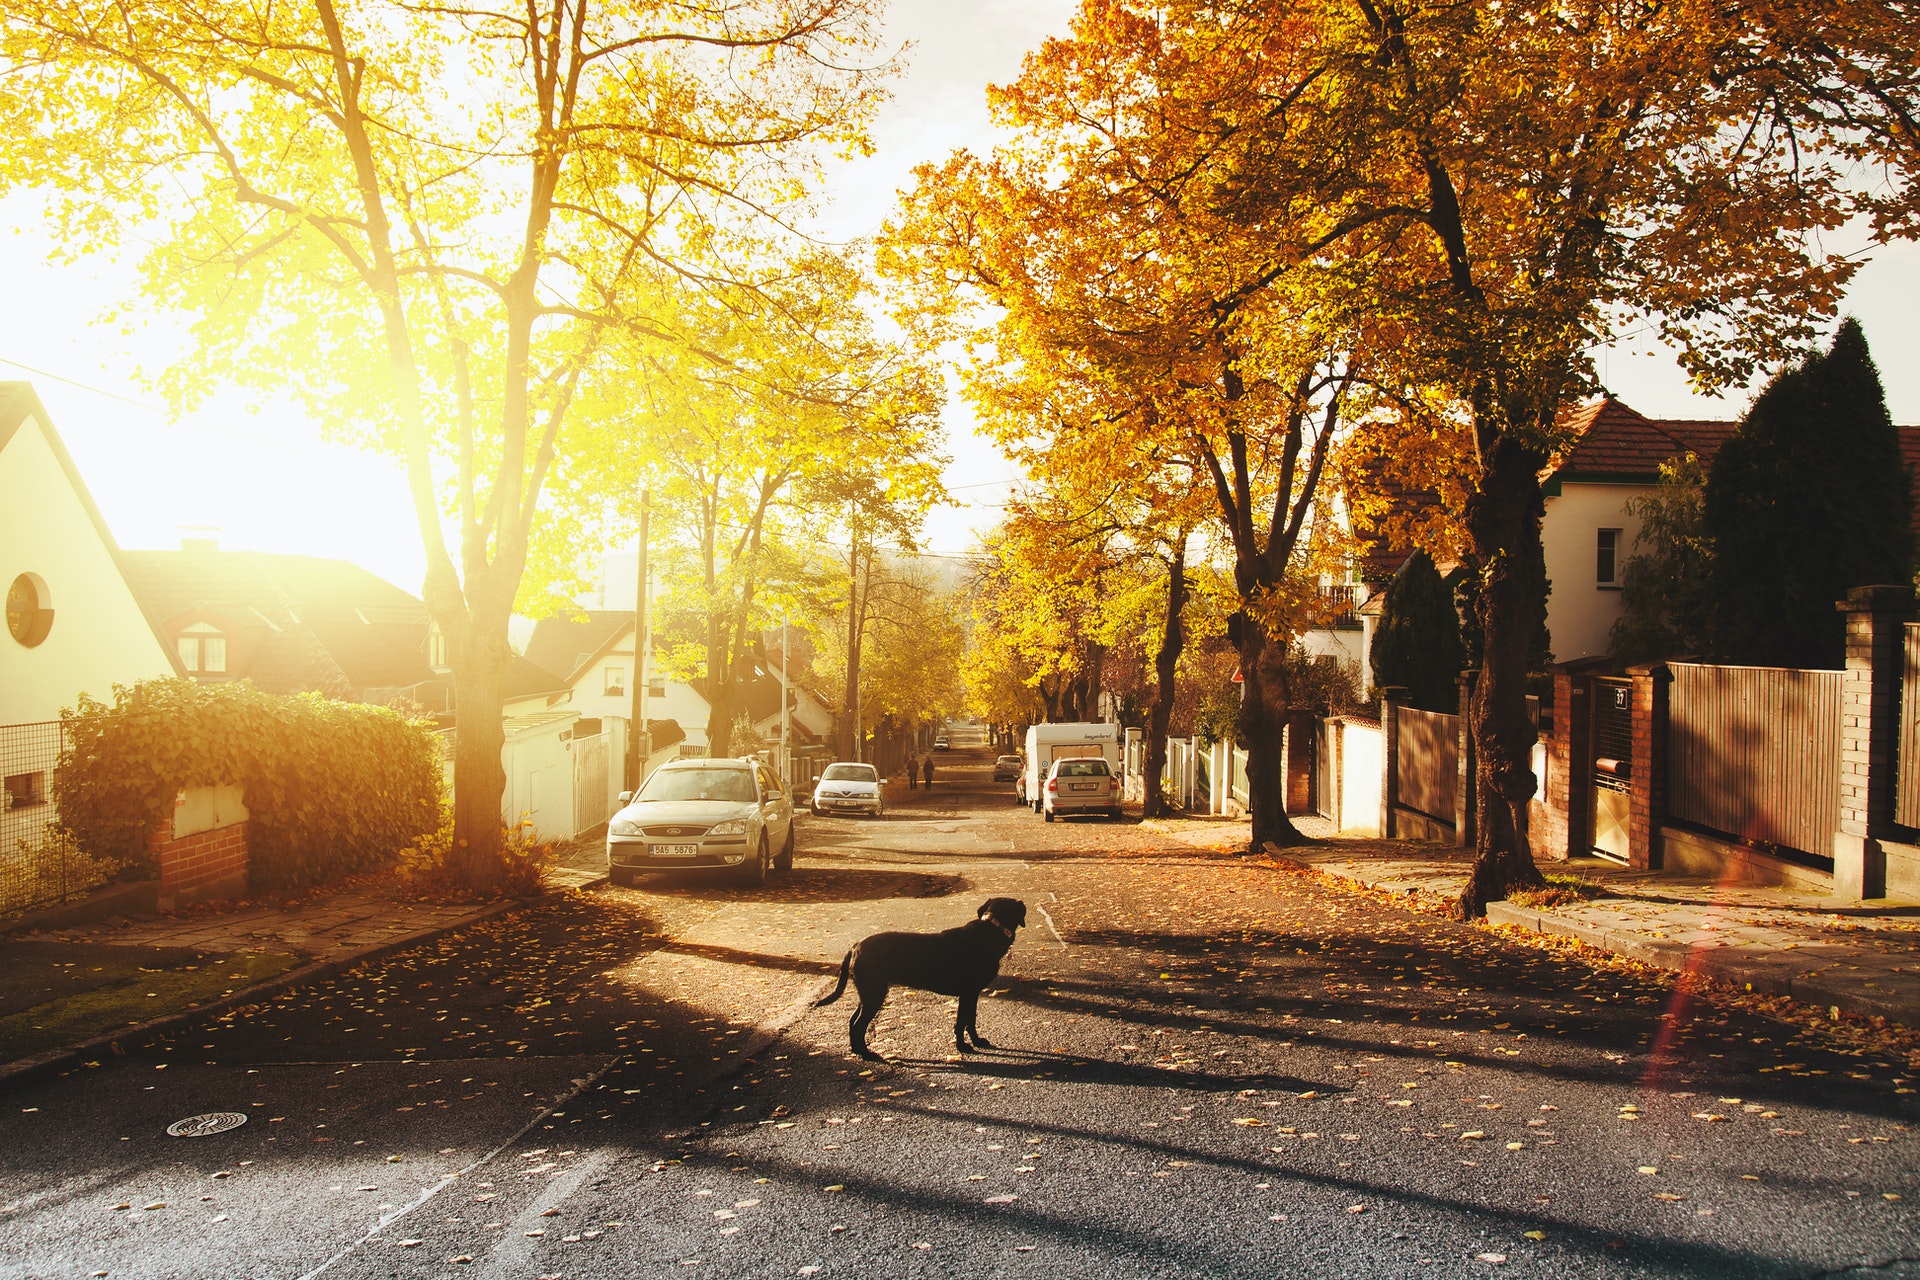 A street of houses lit up by a sunset, with a dog standing in the road